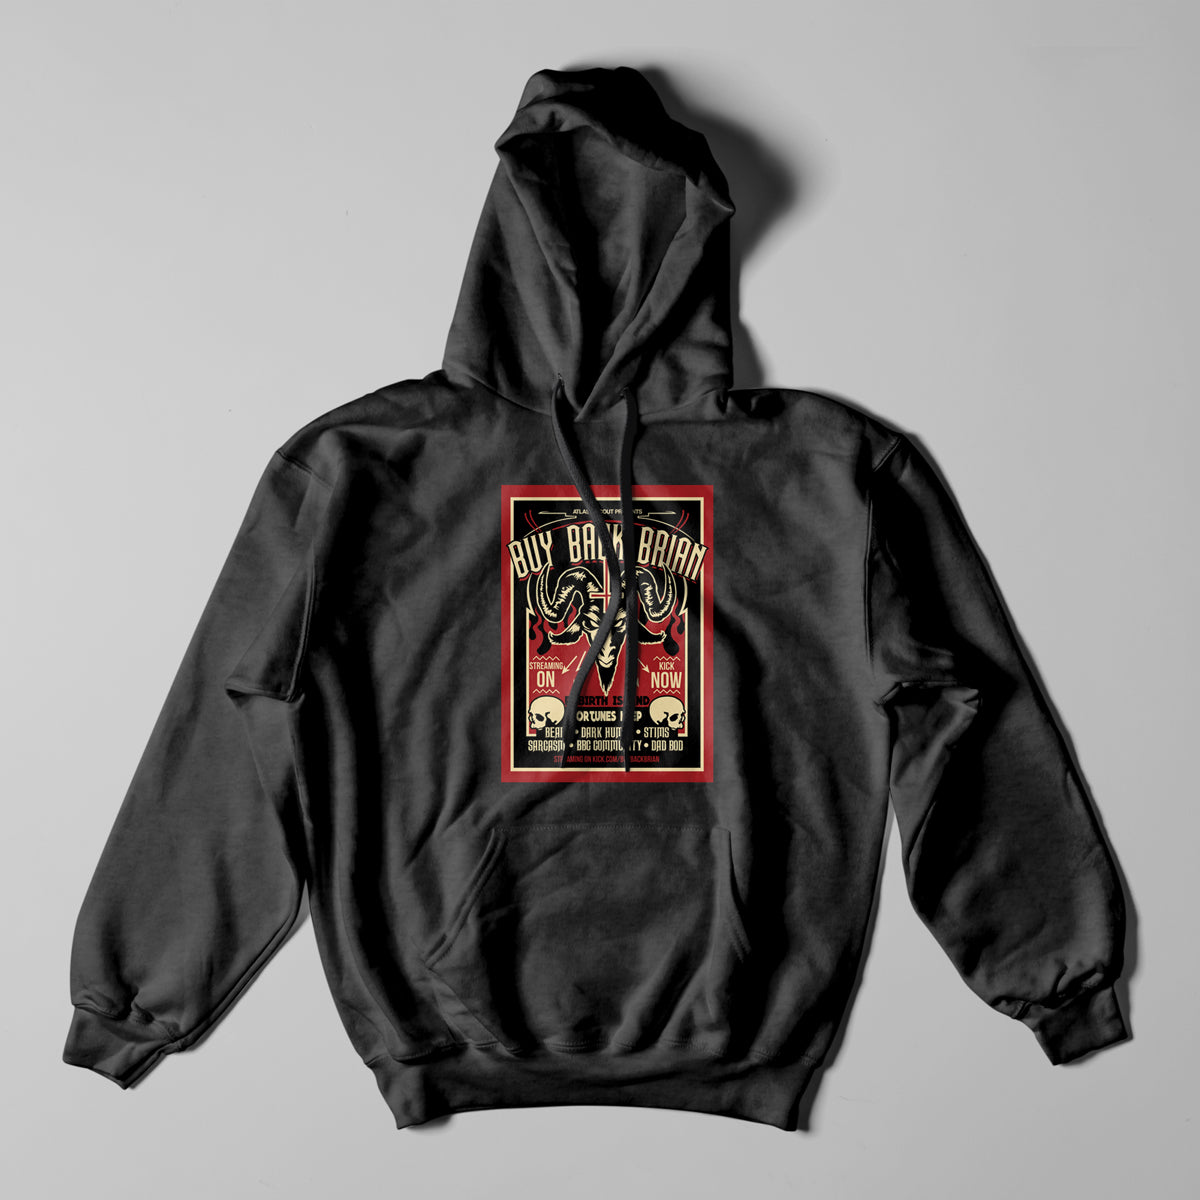 BBB - Goat show poster heavyweight pullover hoodie